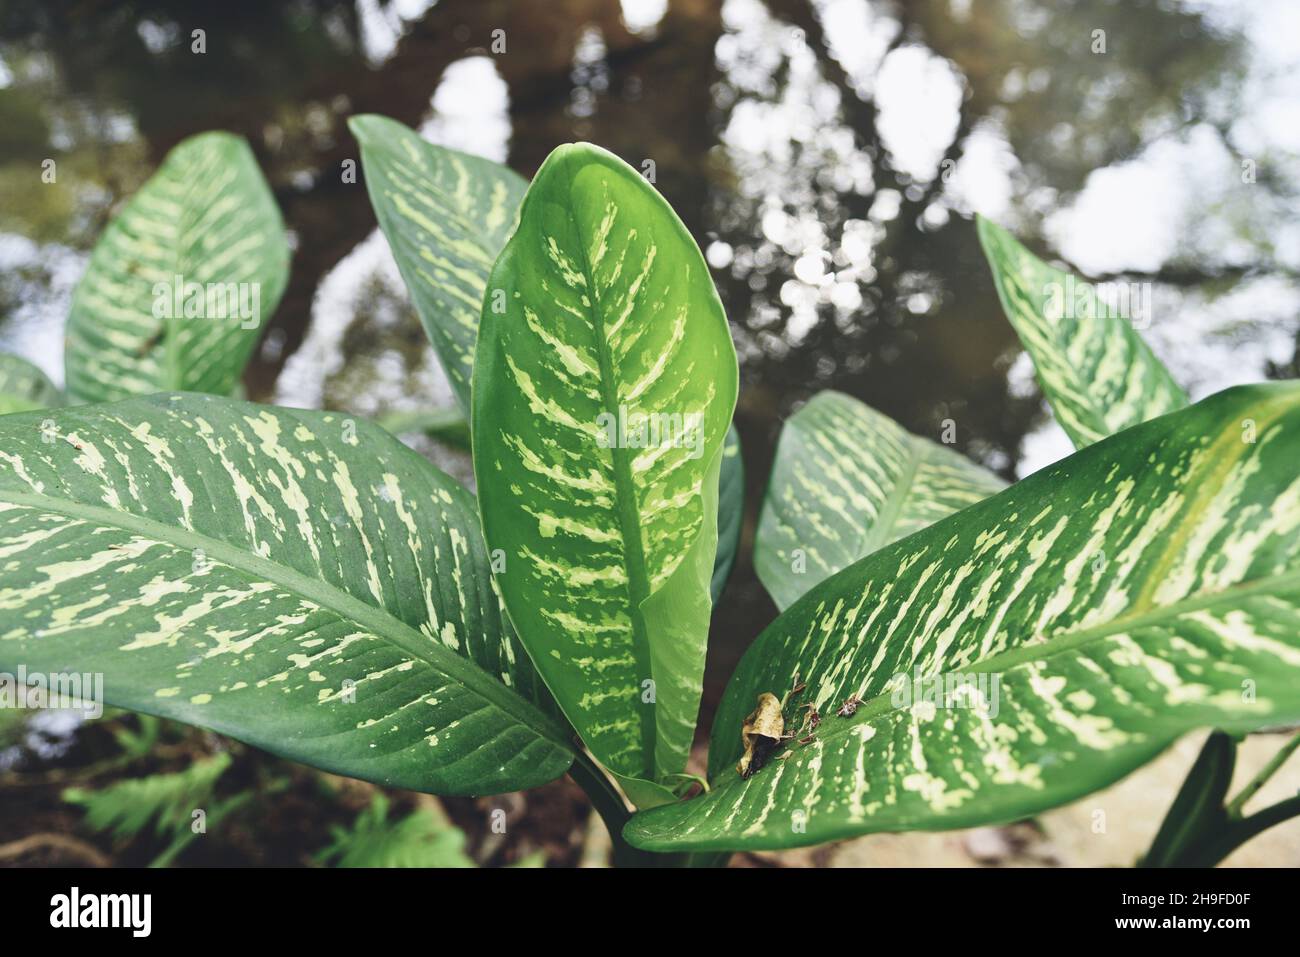 Dieffenbachia flower fresh green and white leaf plant in the home garden ornamental plants in pot, spotted leaves Aglaonema Repotting plant concept Stock Photo